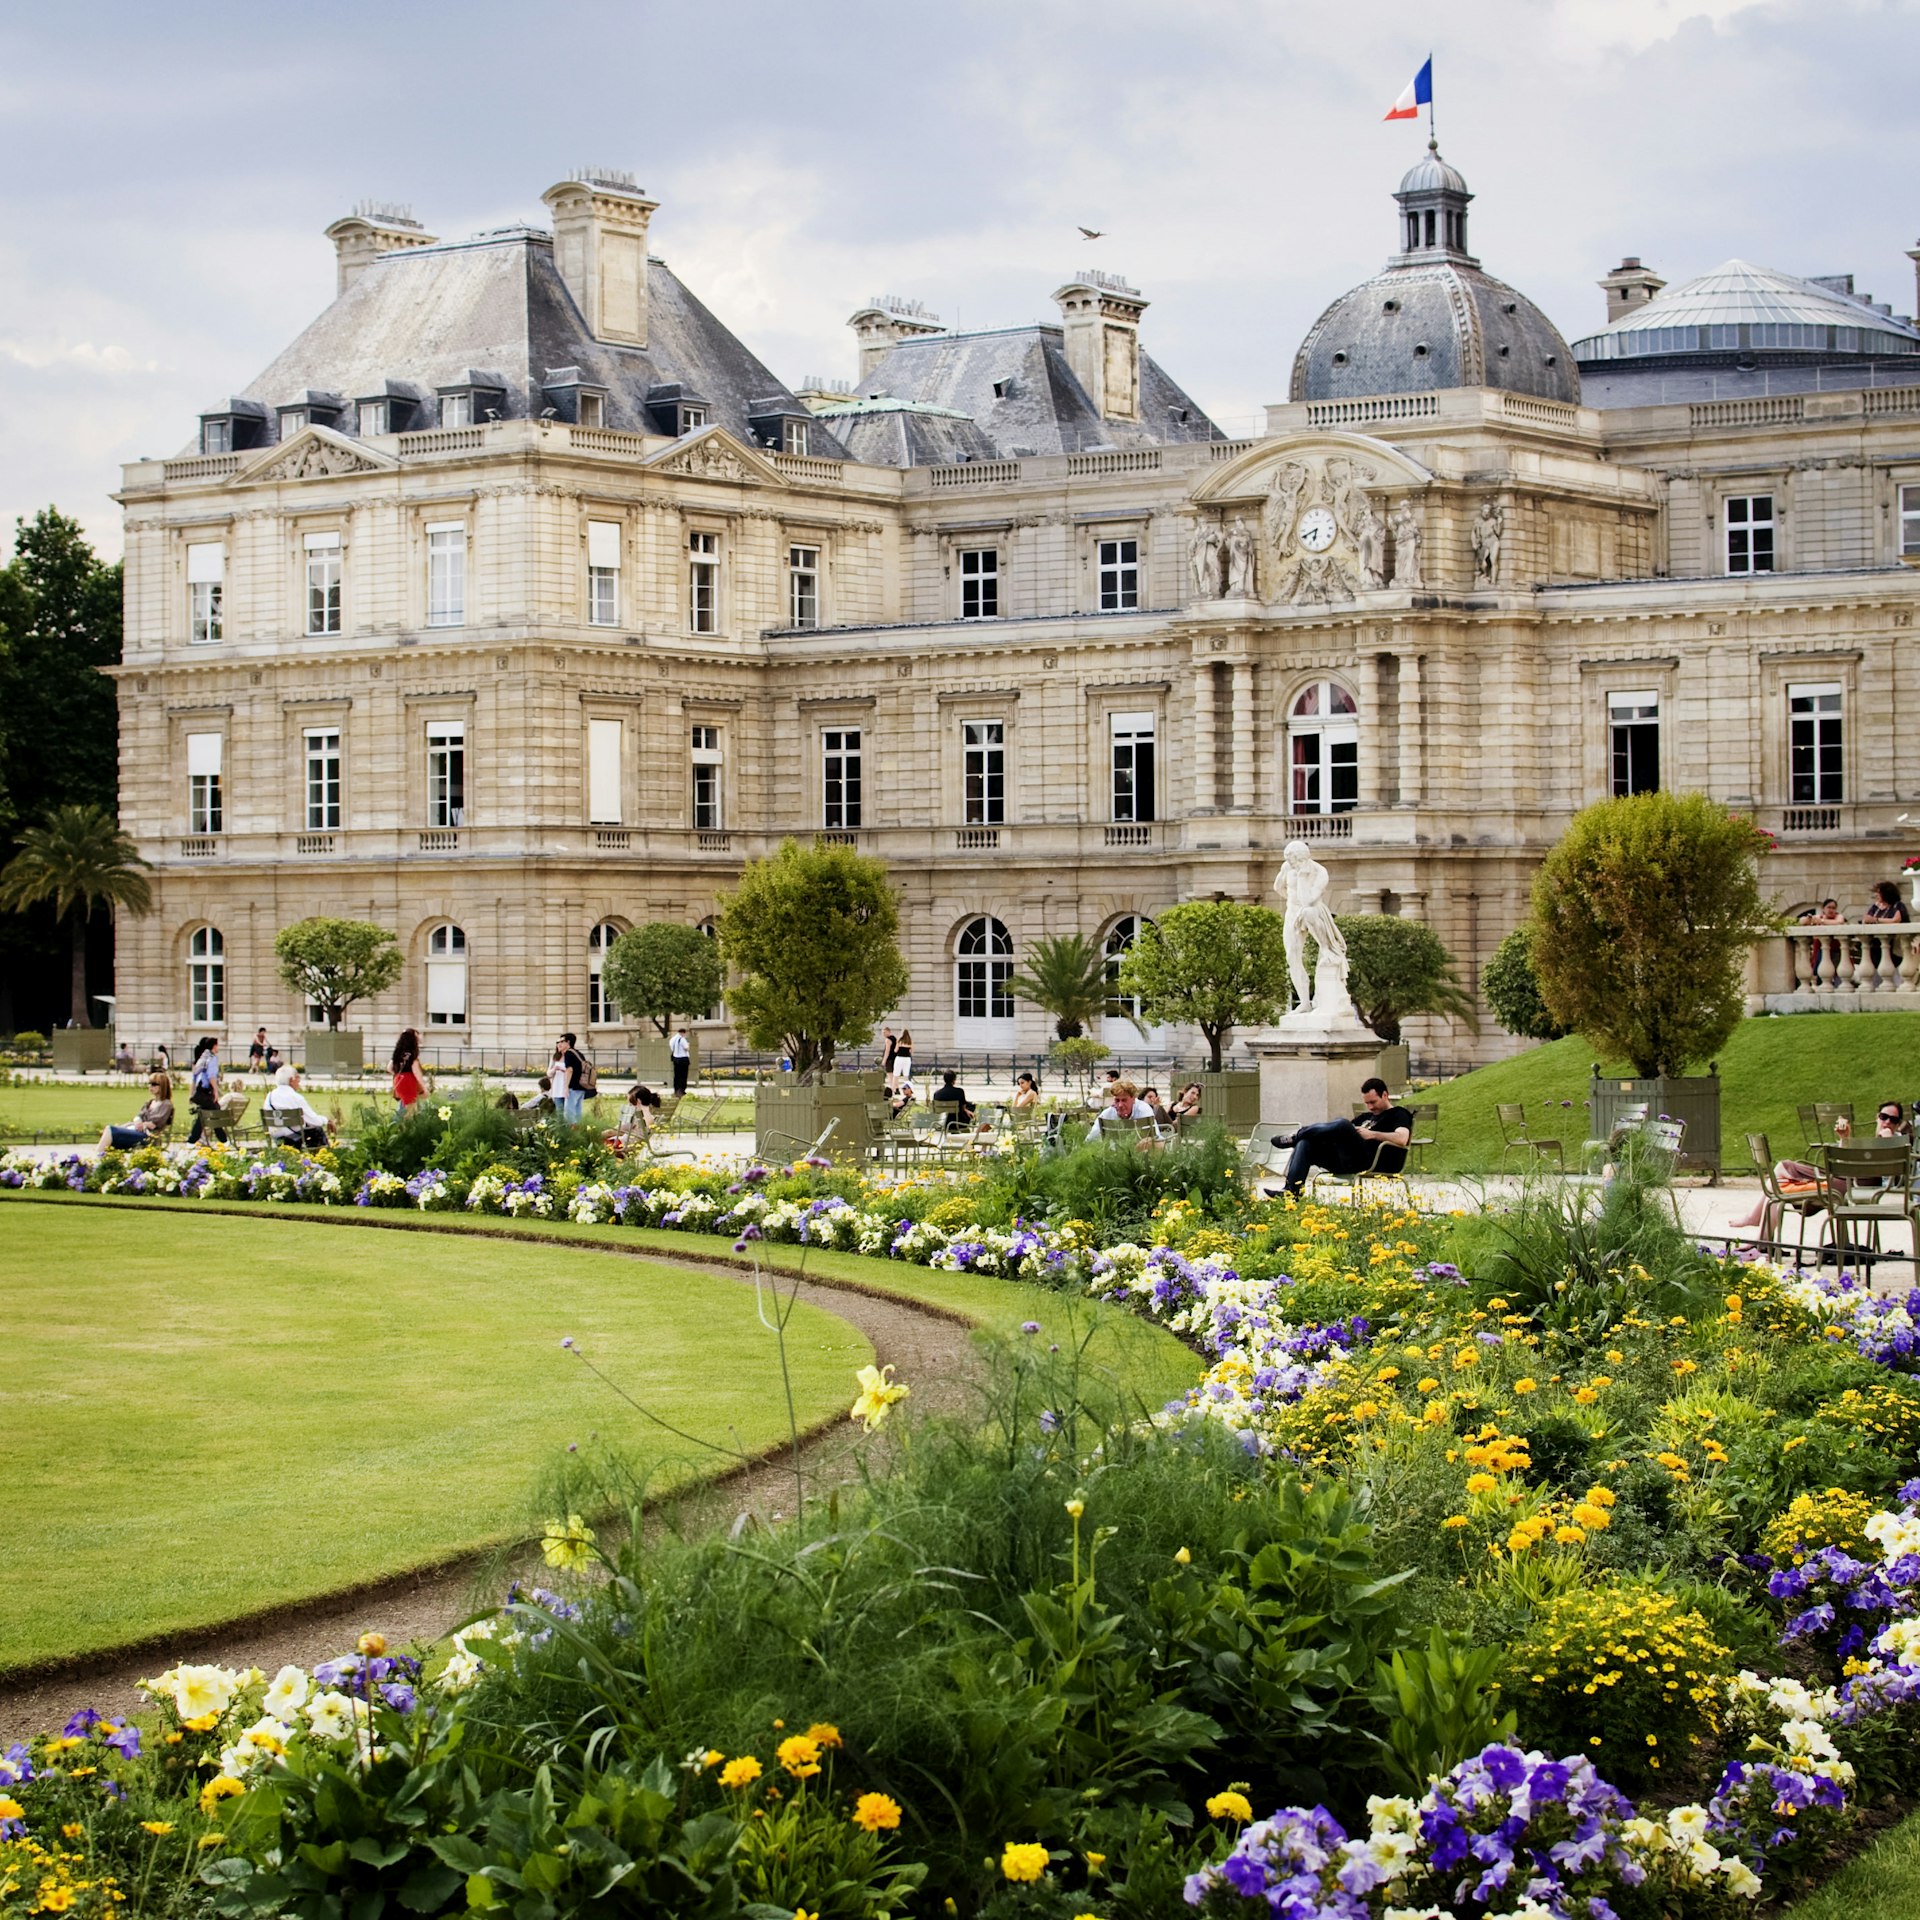 Luxembourg Palace in Jardin du Luxembourg, Paris with blooming flowers in foreground.